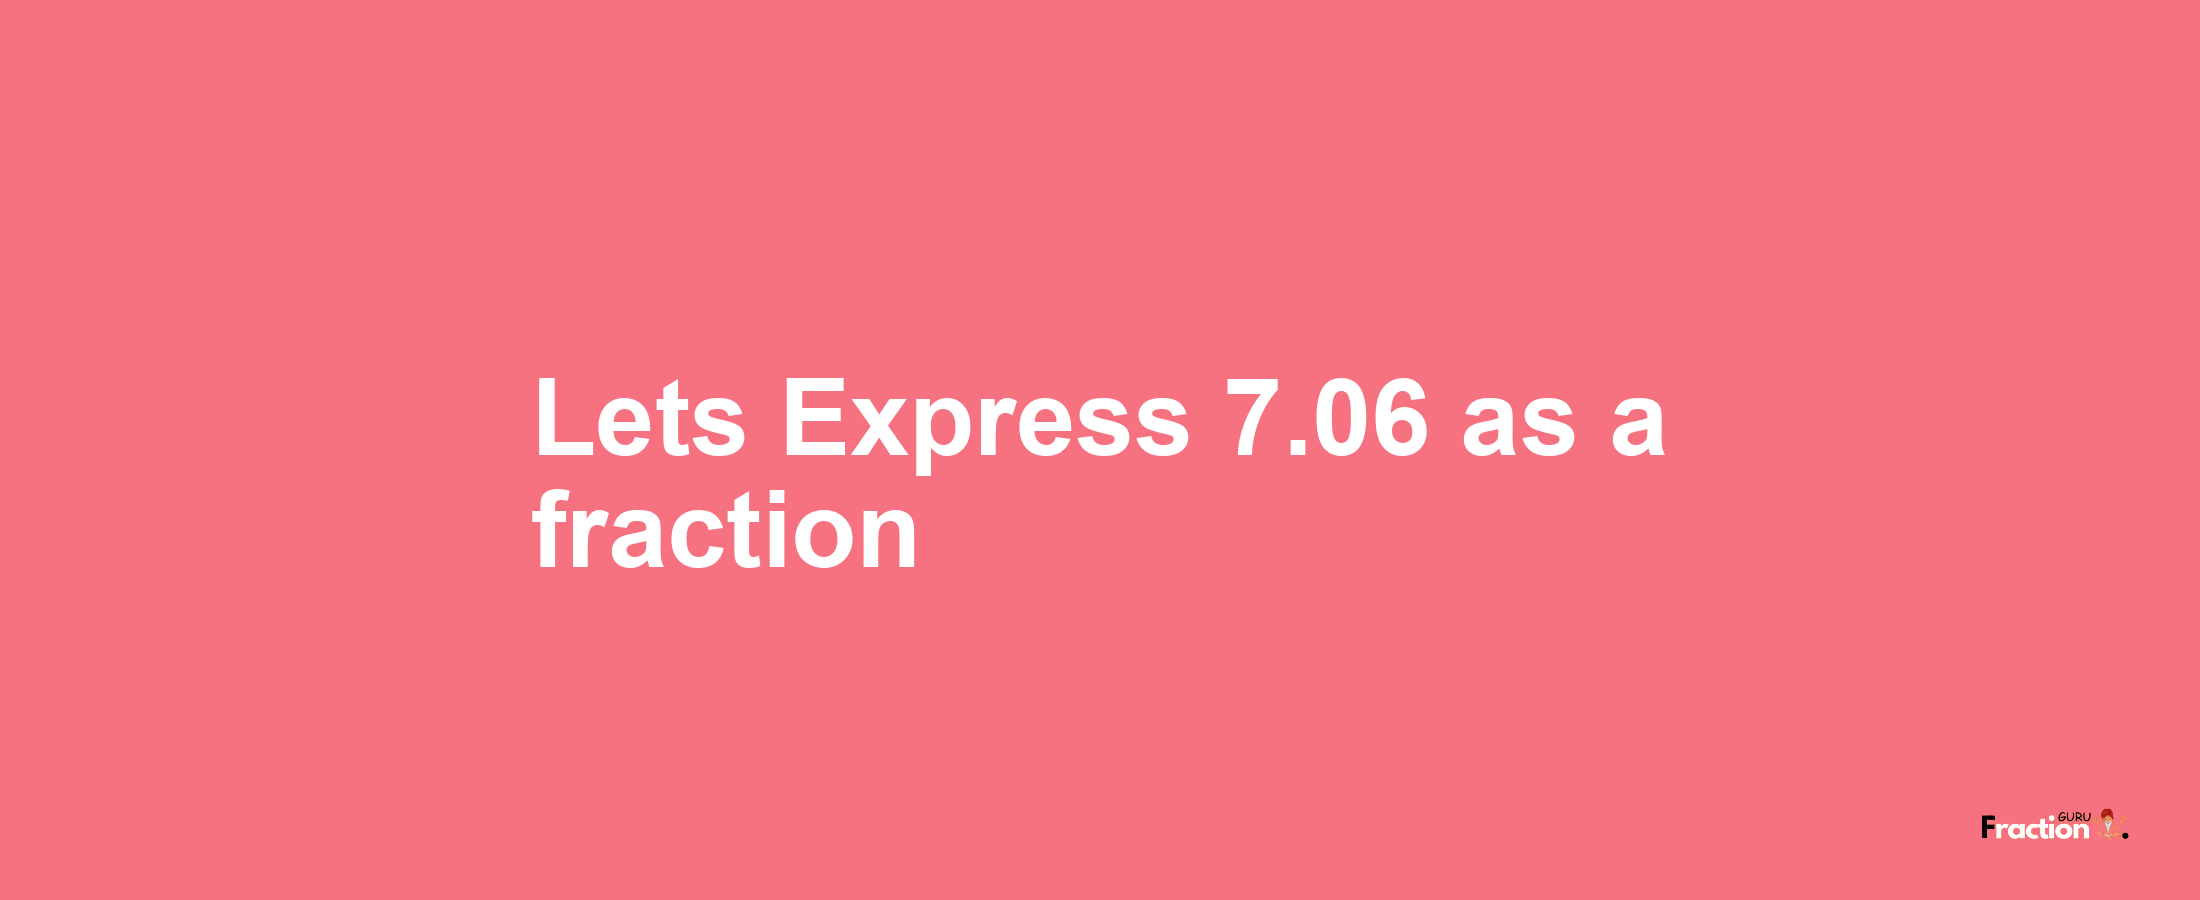 Lets Express 7.06 as afraction